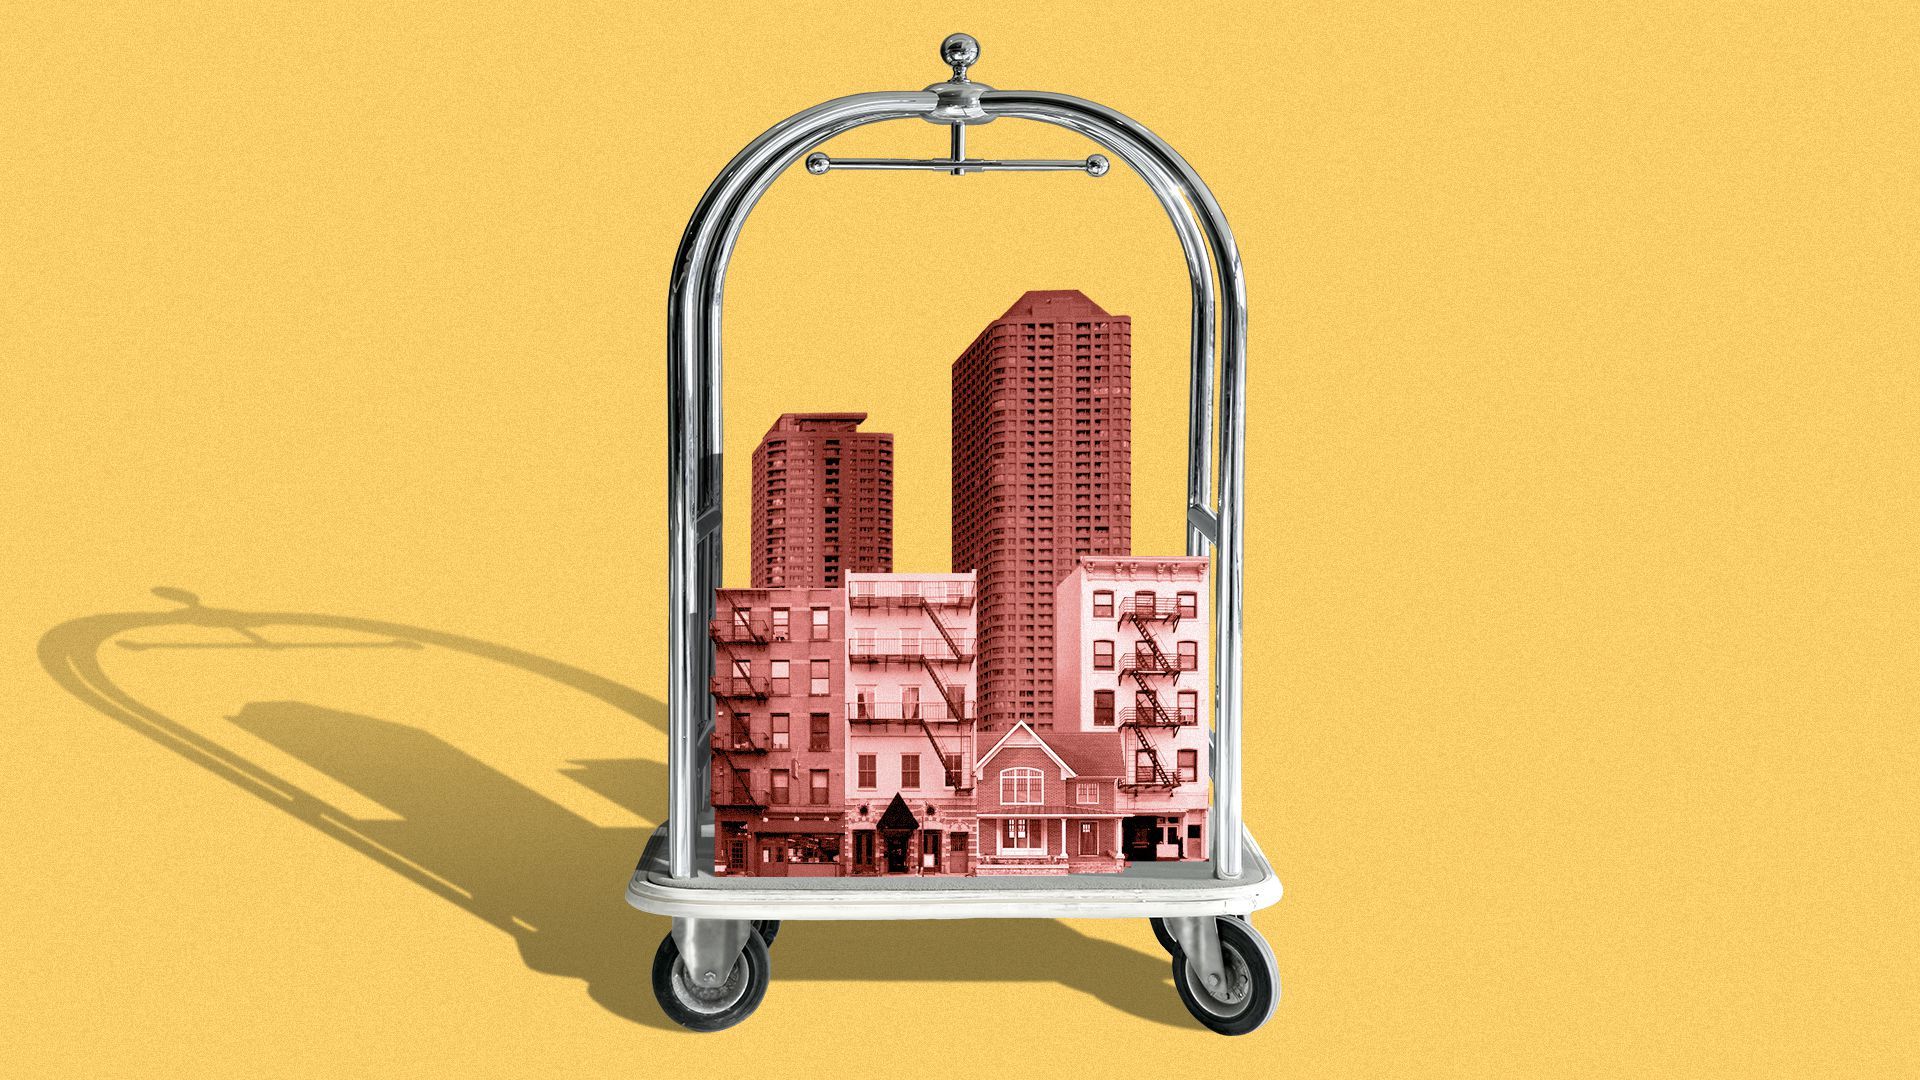 Illustration of a luggage cart carrying apartments, a house, and high-rises.